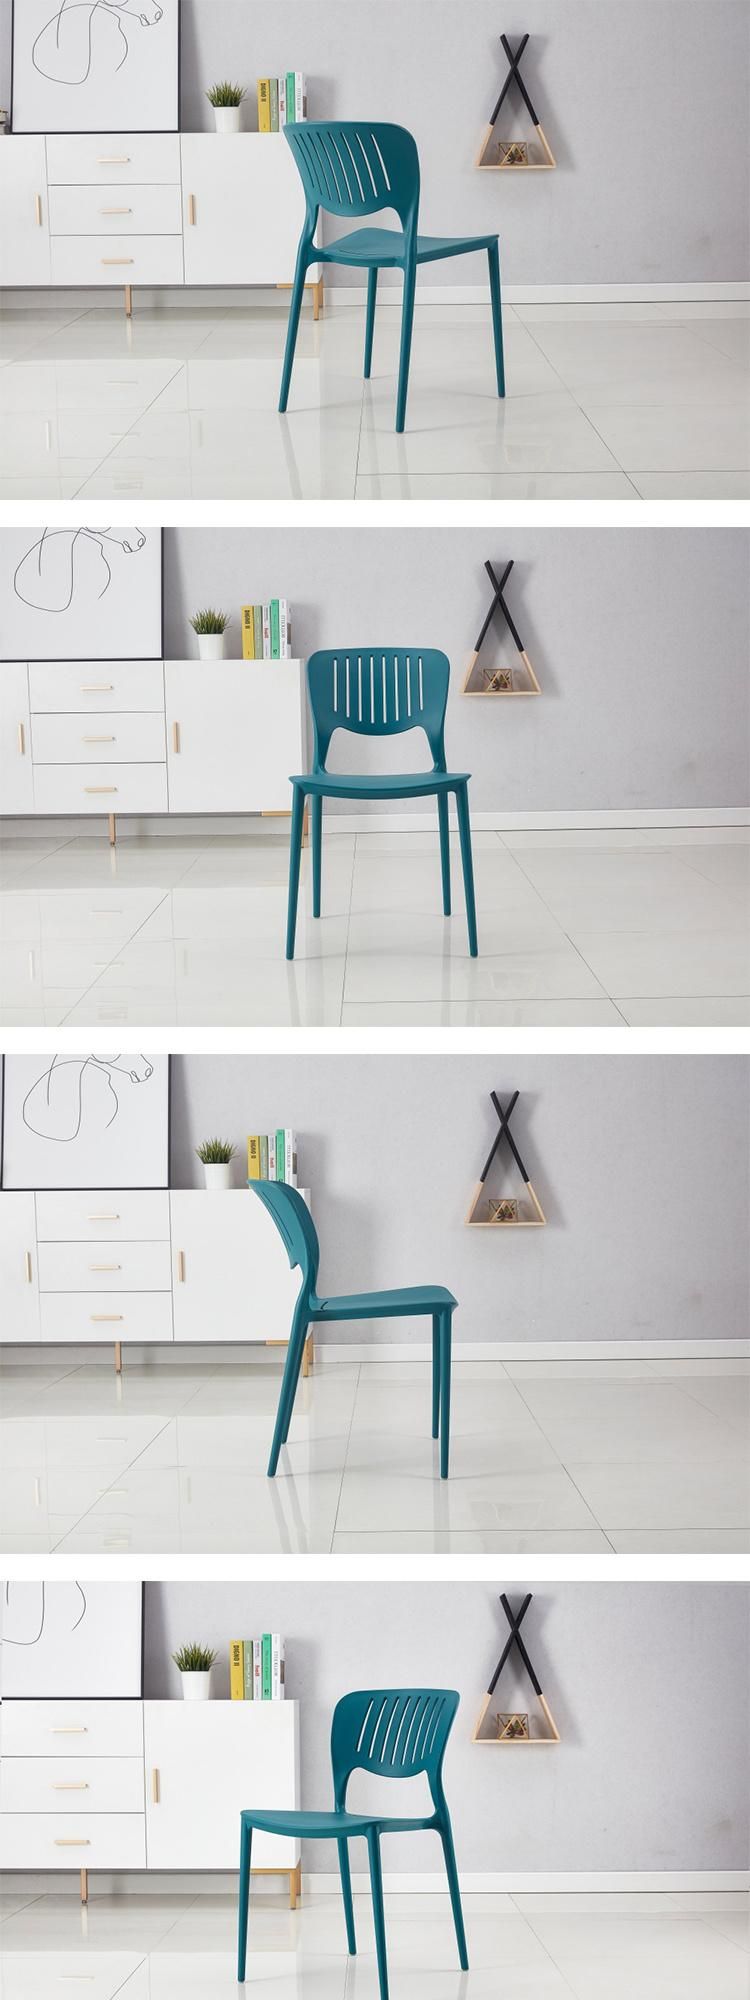 High Quality Home Furniture Modern Design Plastic Chair Dining Room PP Seat for Garden